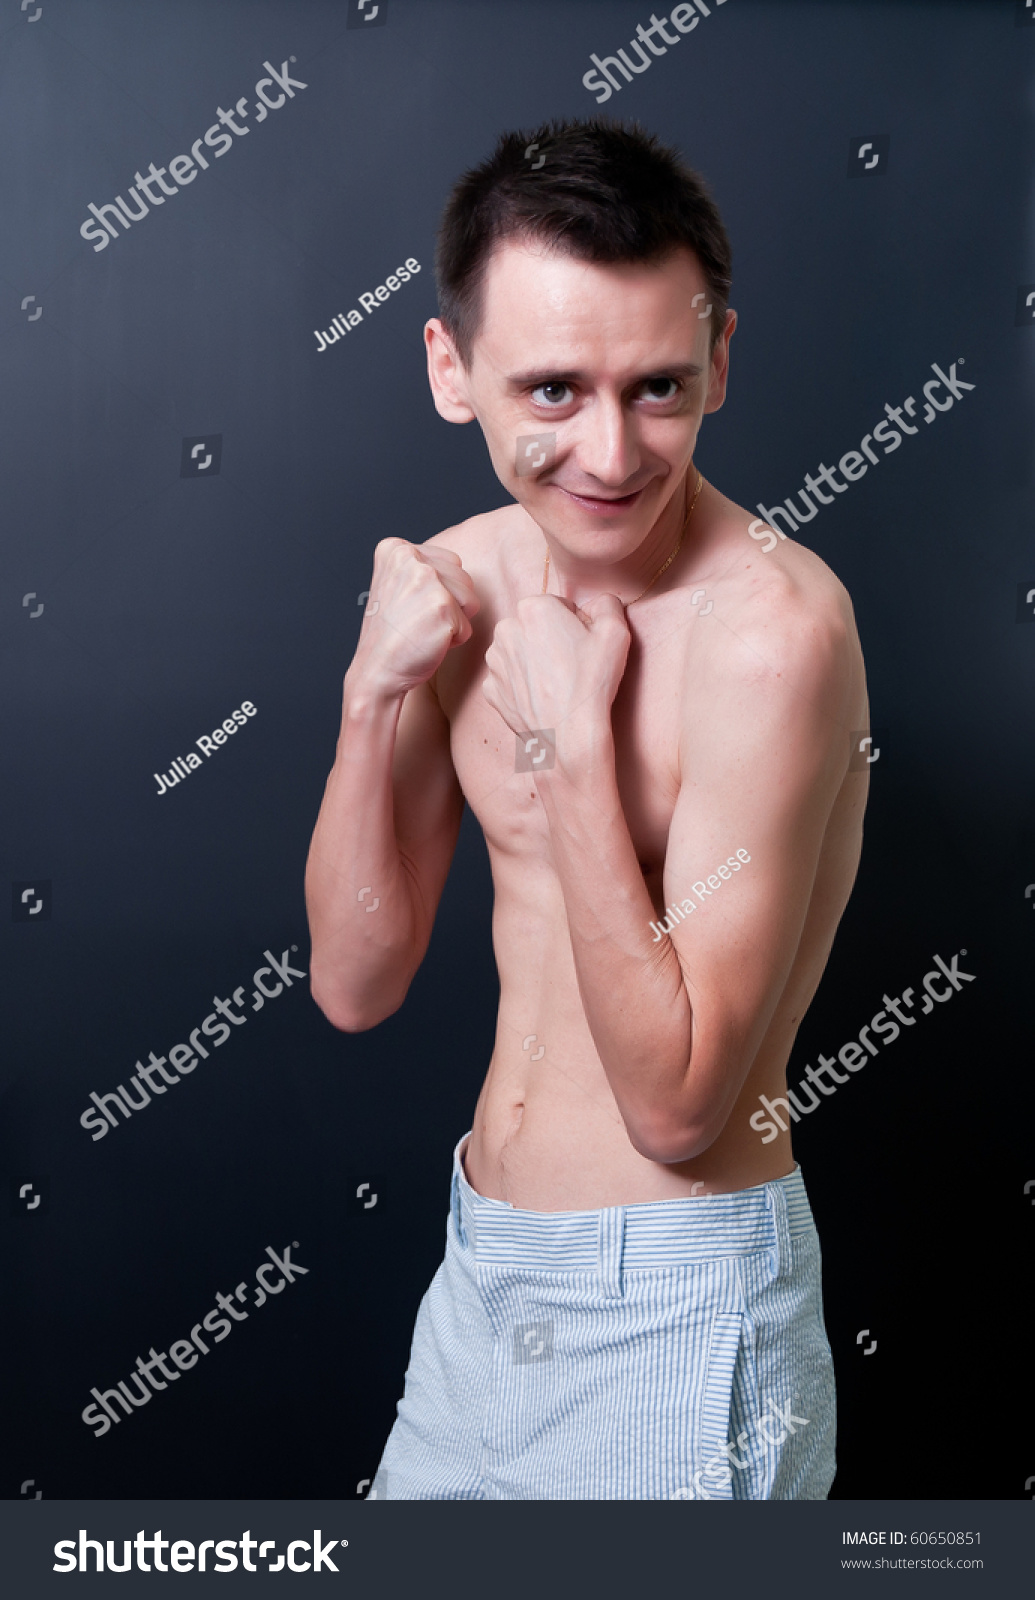 Skinny Topless Man Showing His Muscles Stock Photo 60650851 Shutterstock